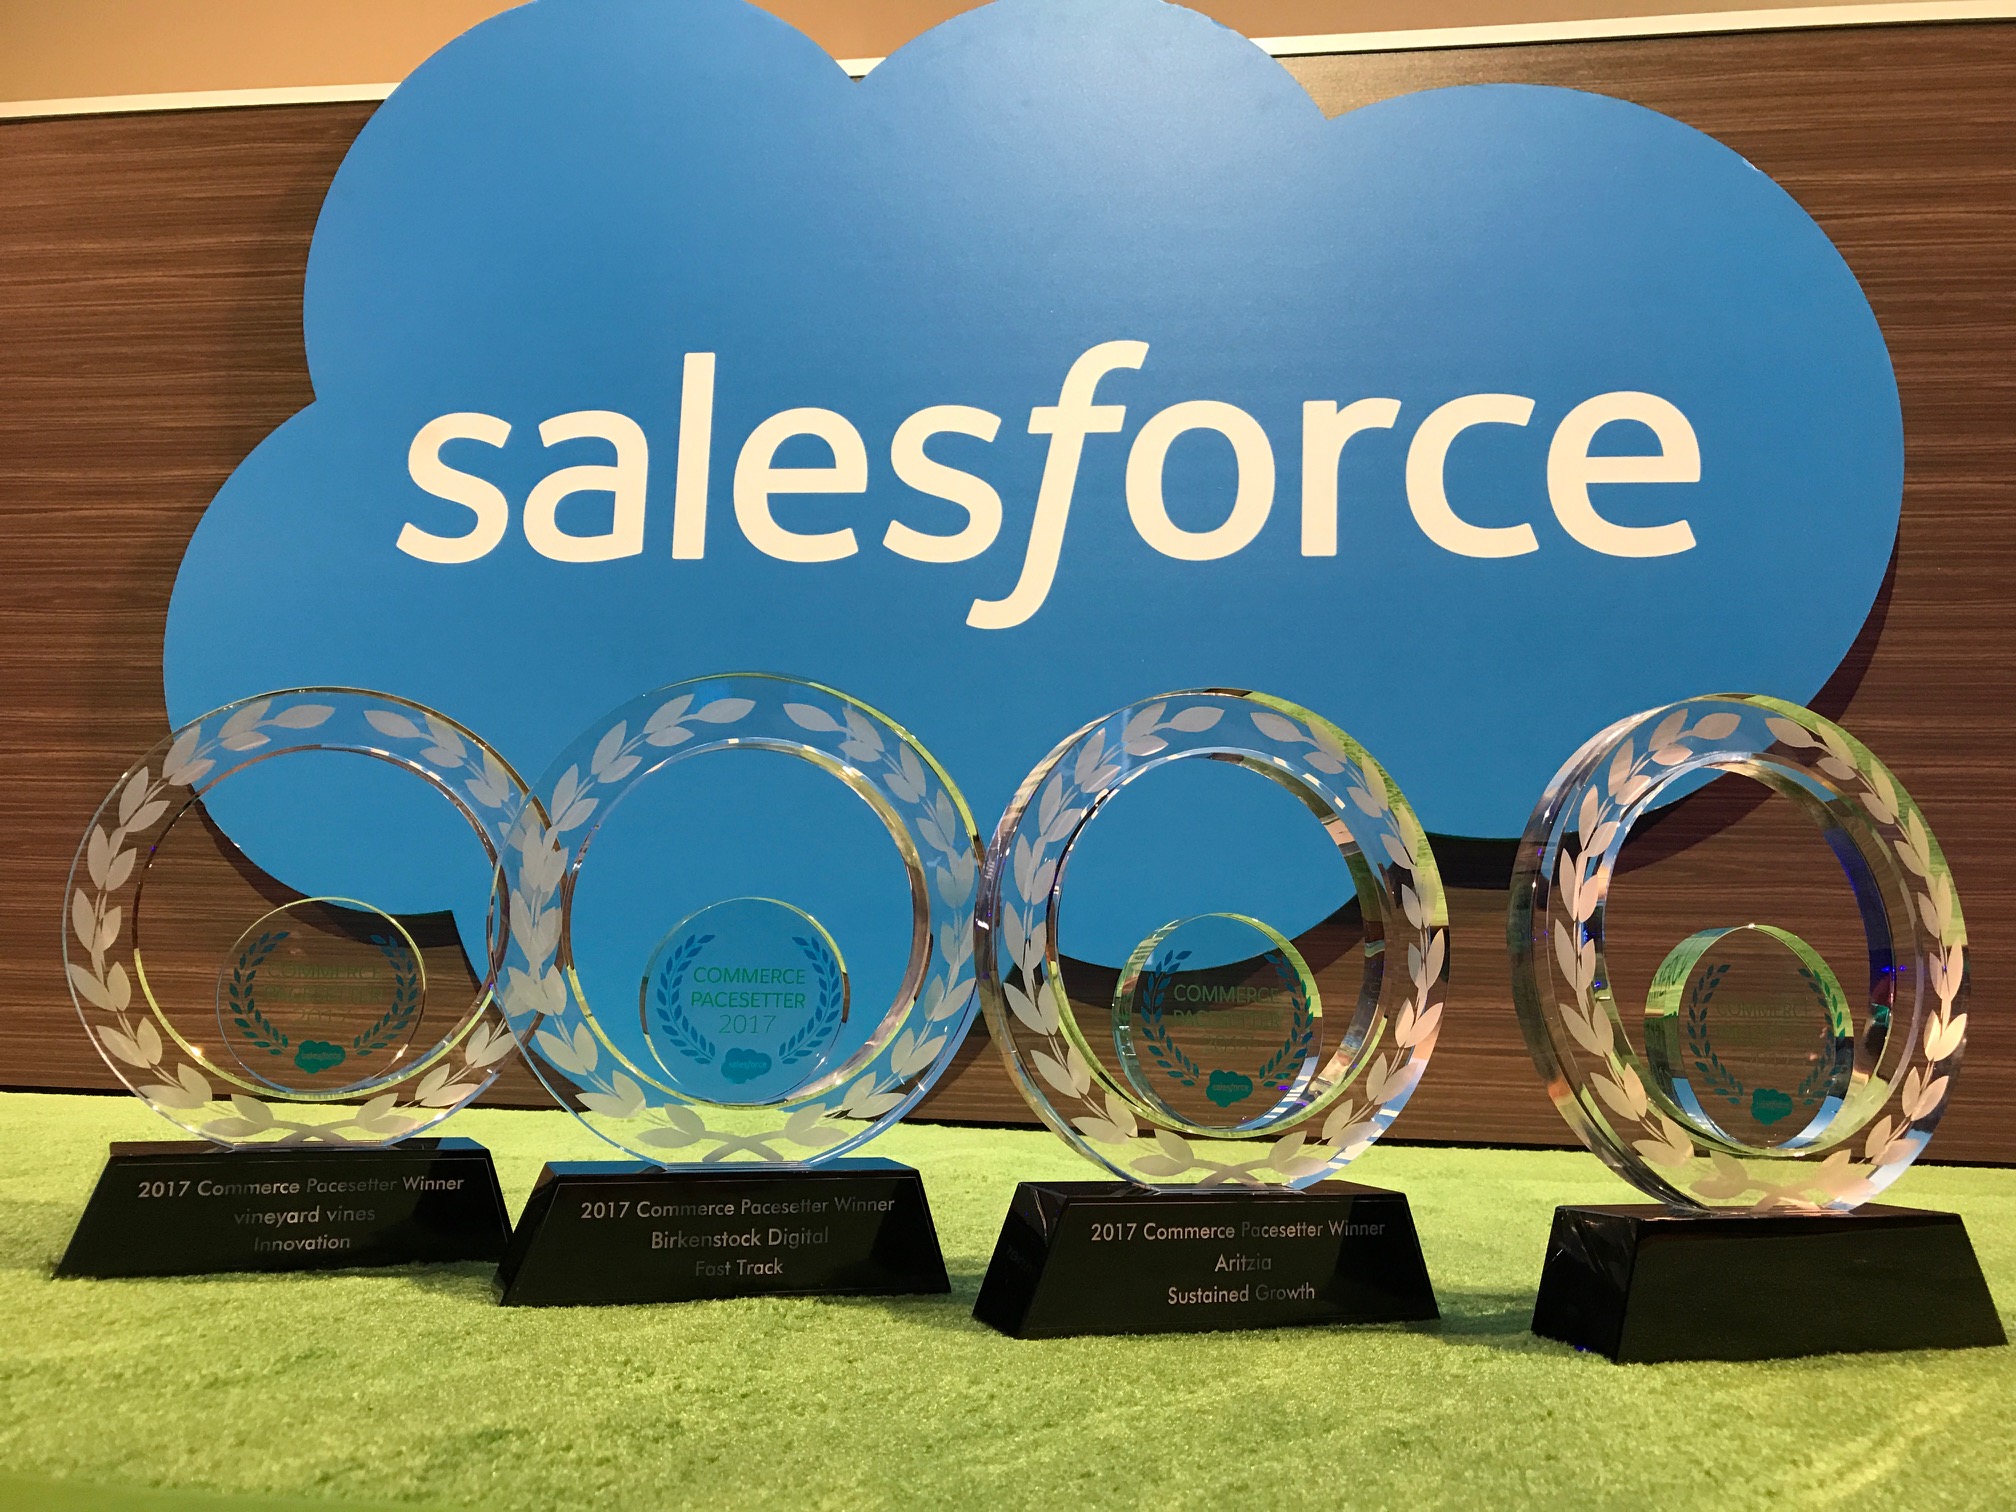 Aritzia, BIRKENSTOCK and Vineyard Vines Explain How They Innovate and Grow With Salesforce Commerce Cloud